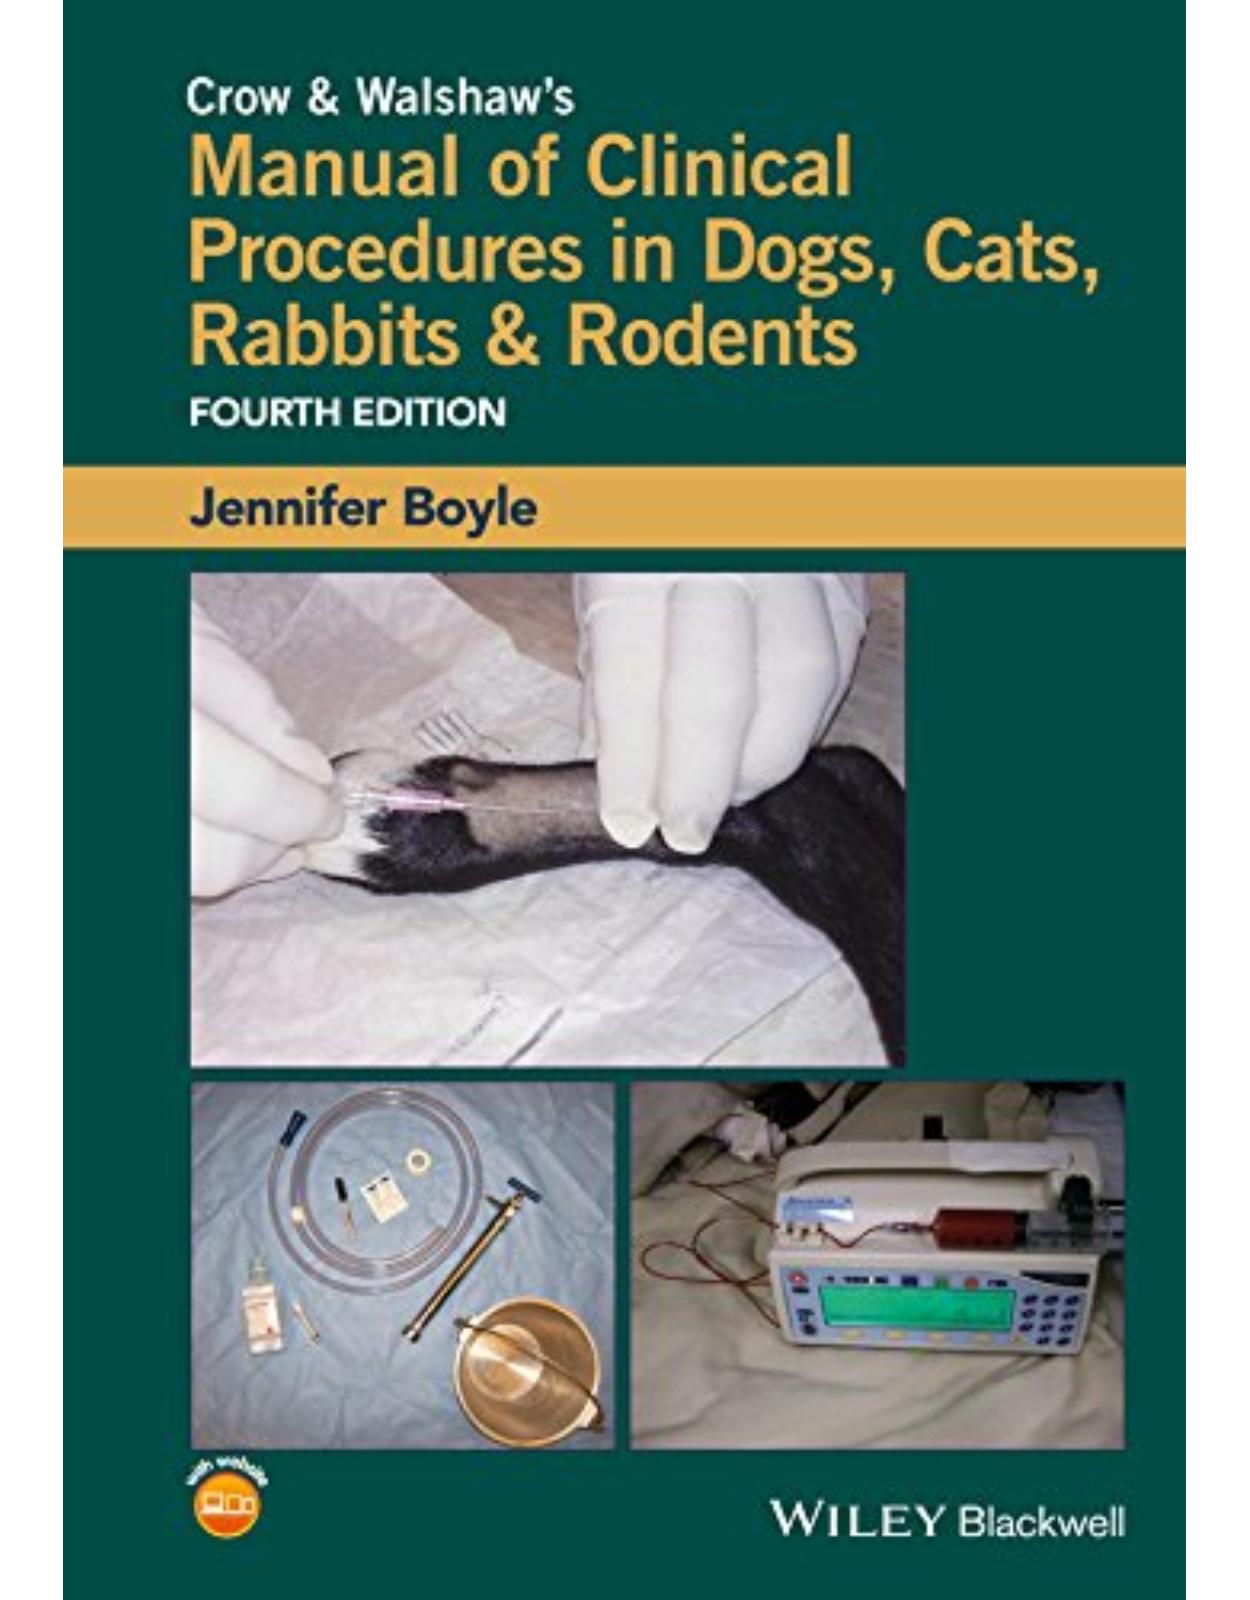 Crow & Walshaw′s Manual of Clinical Procedures in Dogs, Cats, Rabbits & Rodents 4e